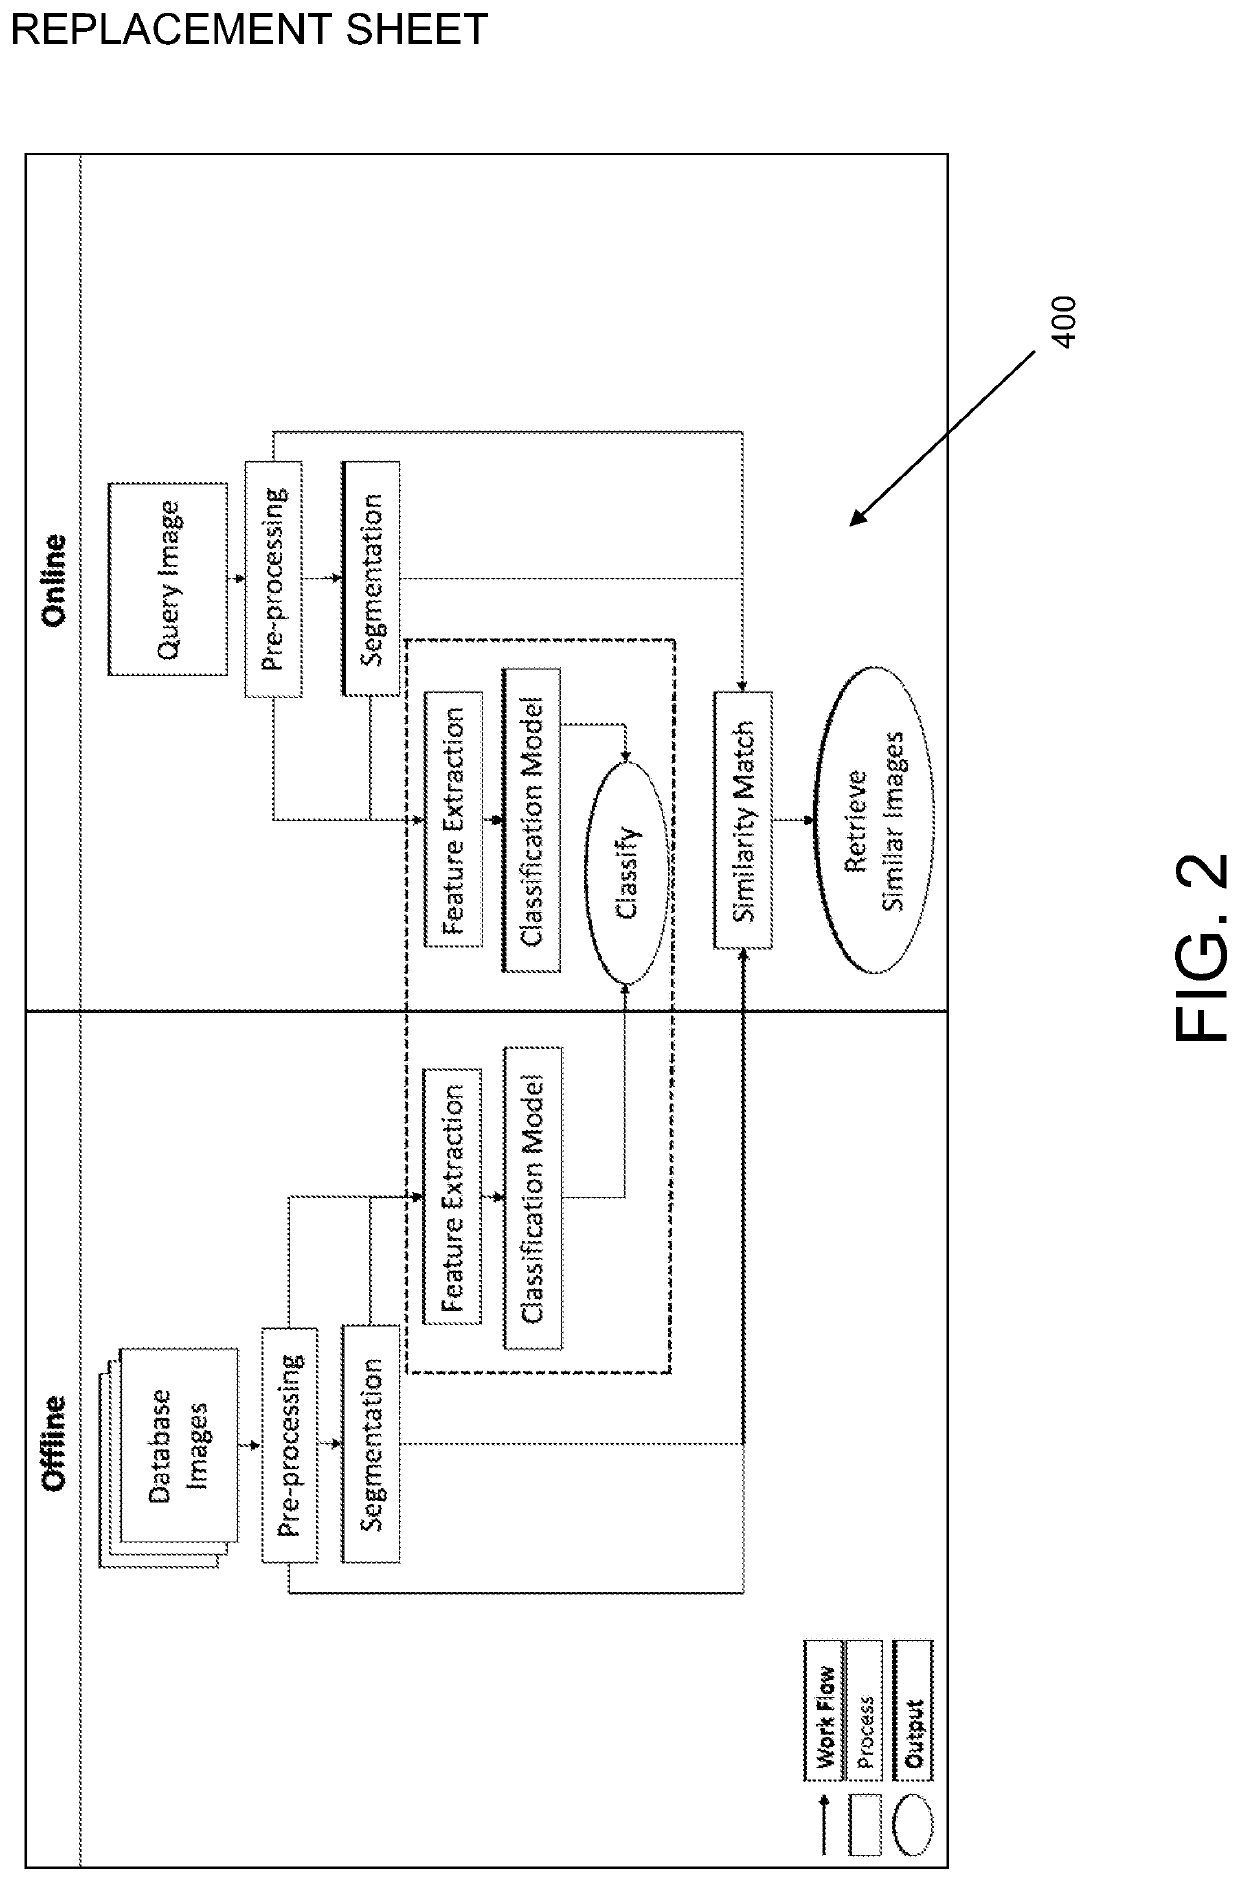 System and method for automated diagnosis of skin cancer types from dermoscopic images